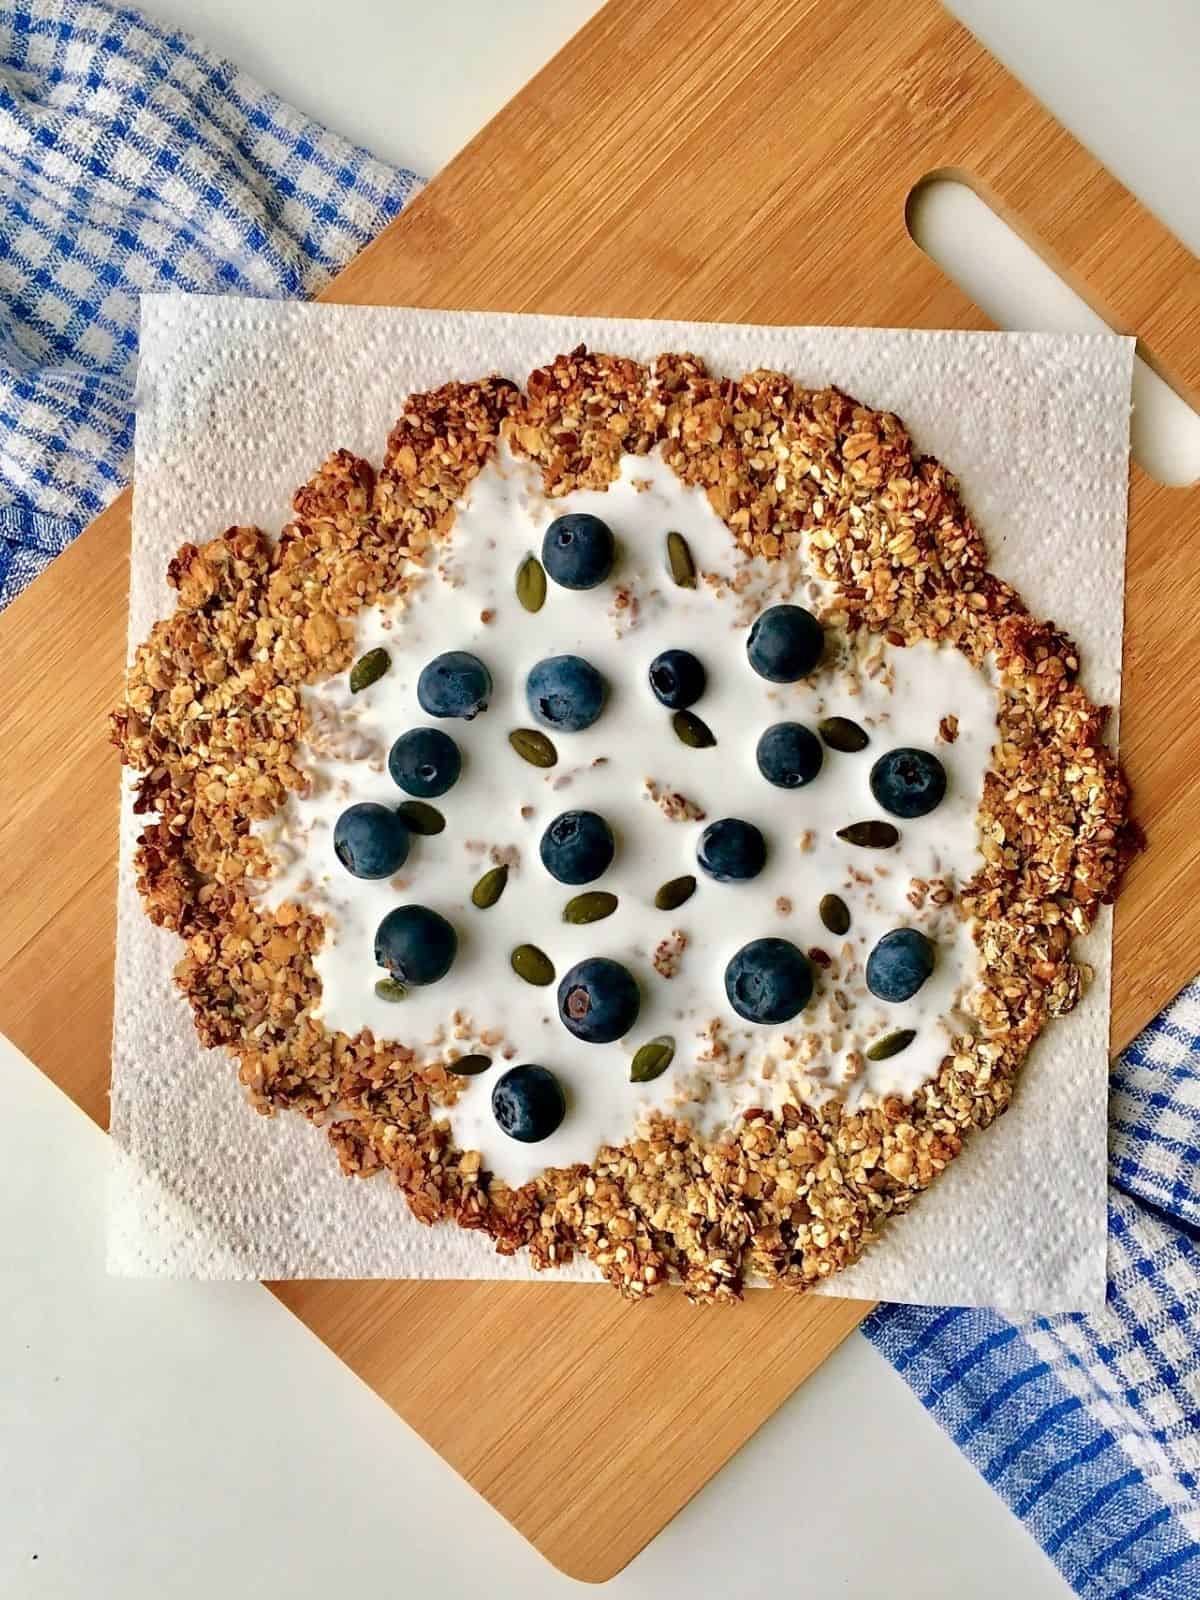 granola breakfast pizza on a wooden board on top of a blue checked tea towel.